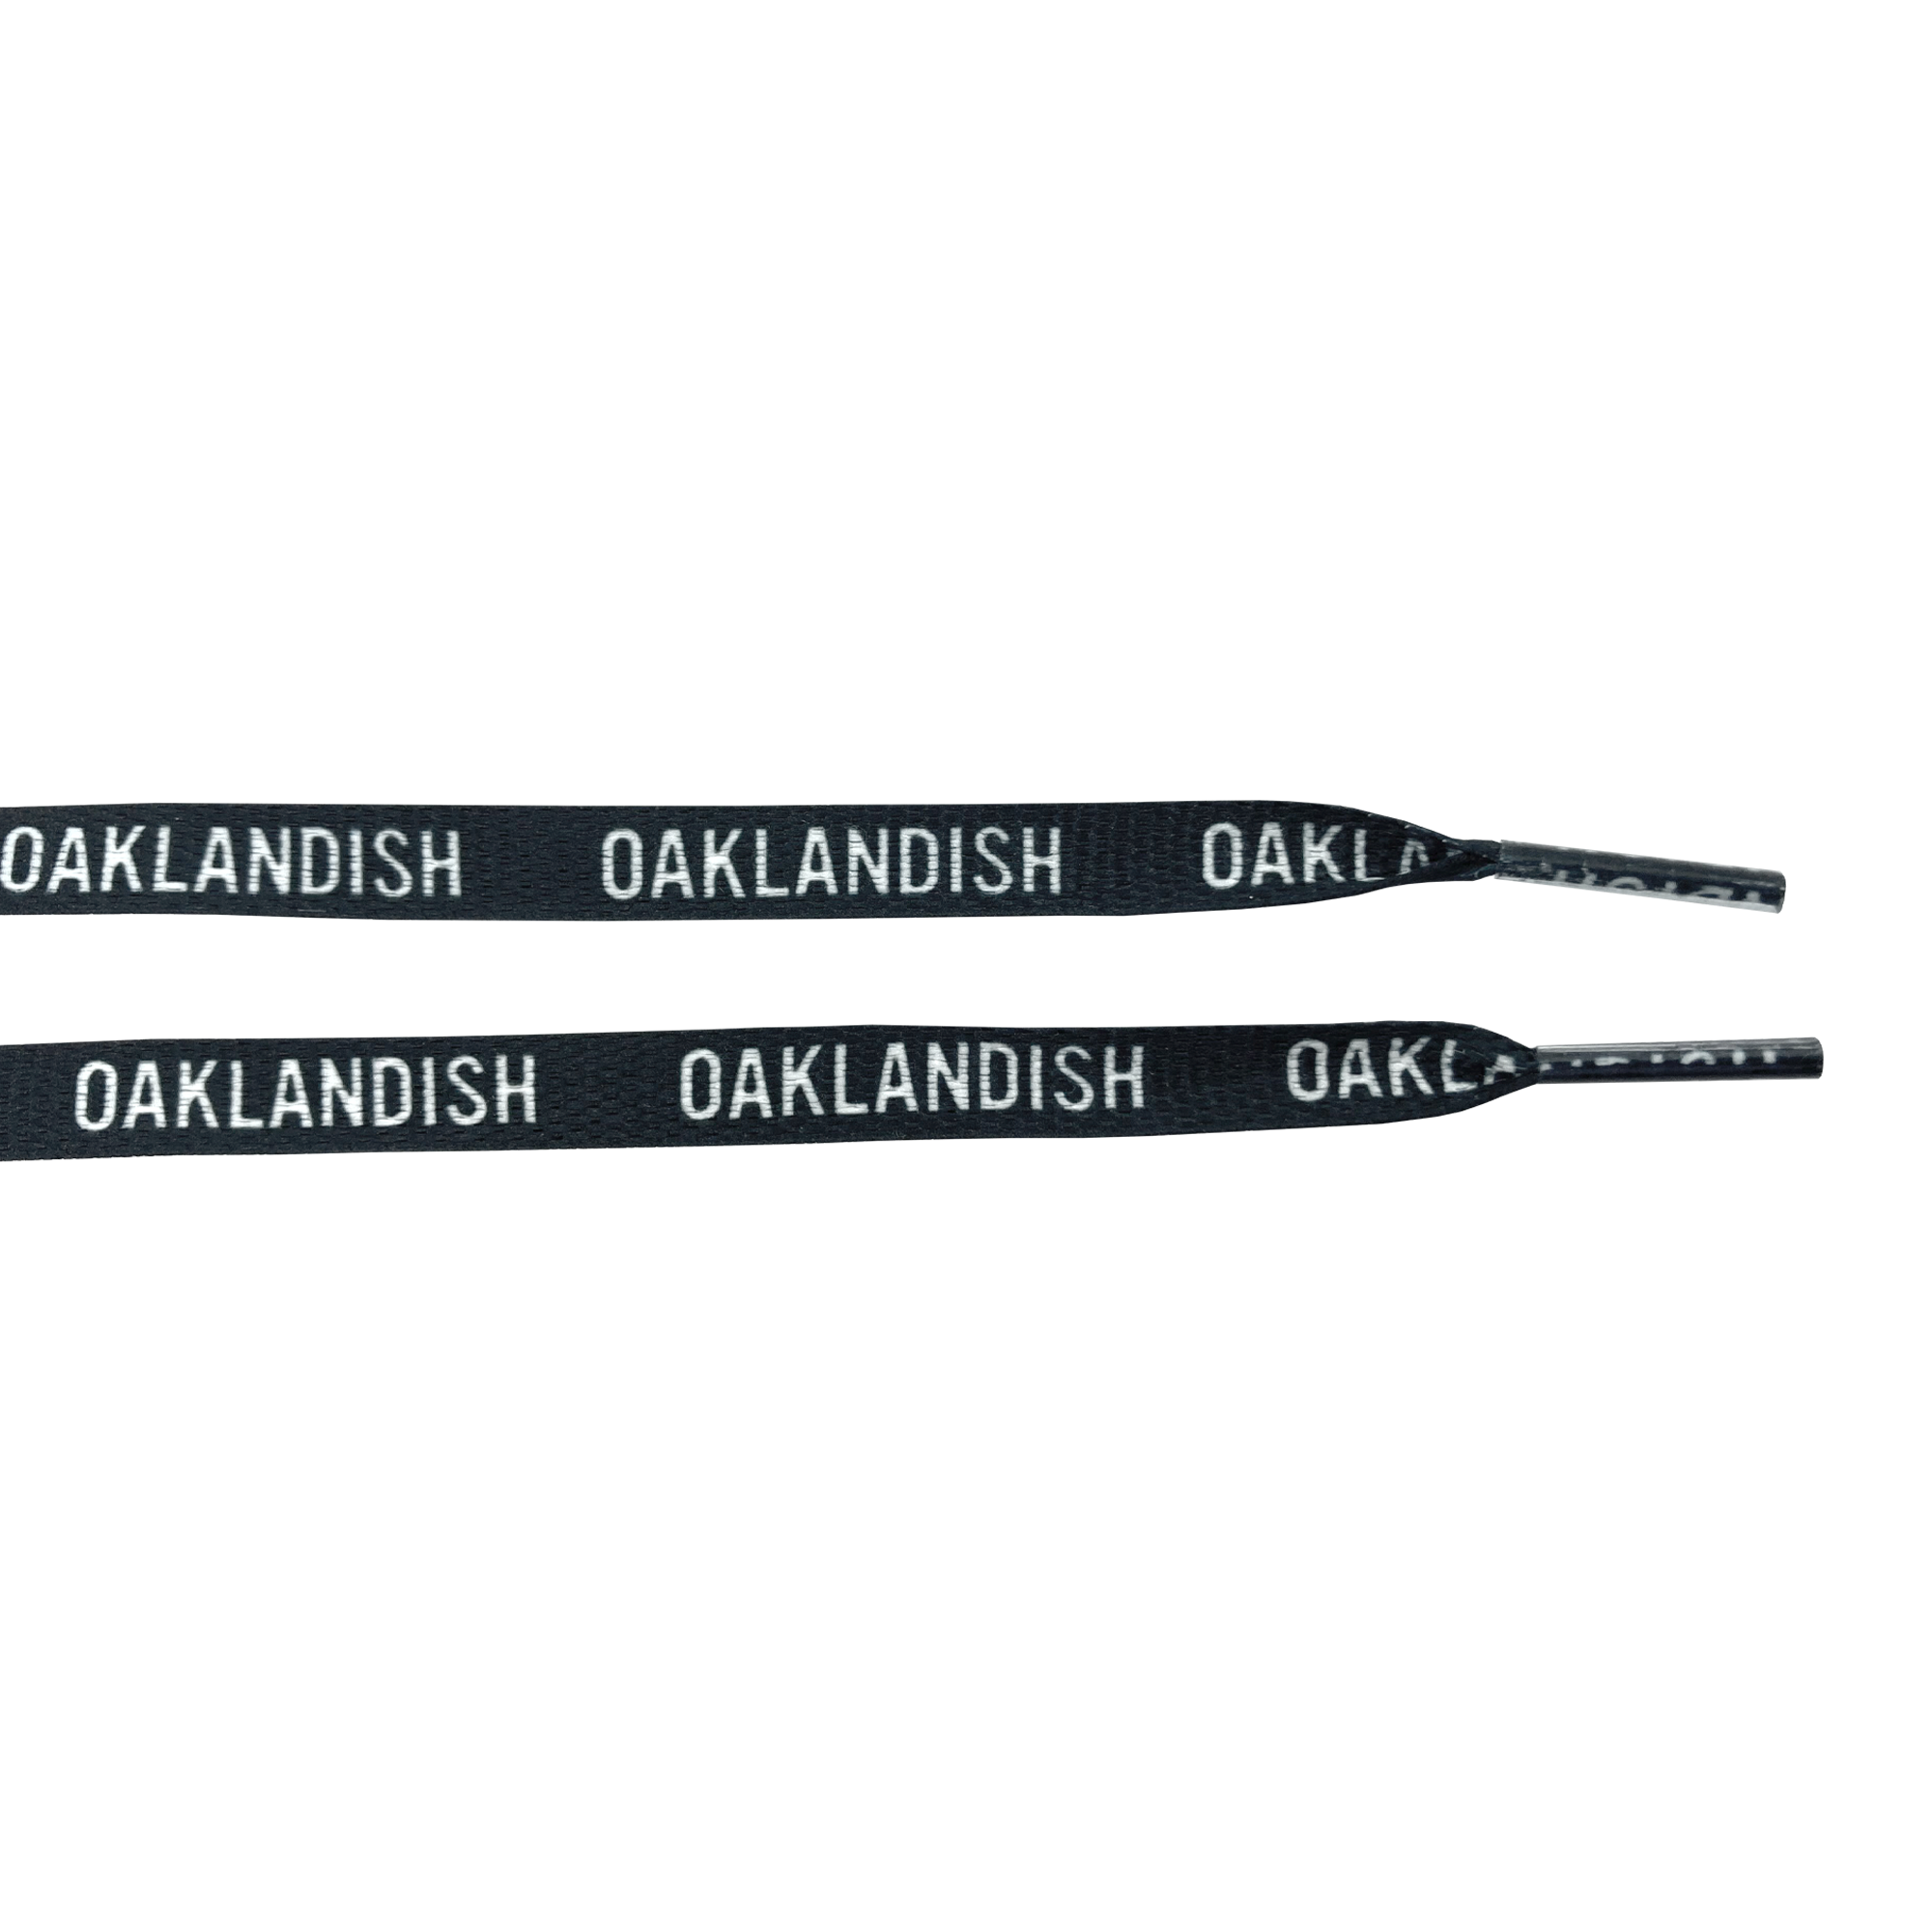 Ends of two black shoelaces with white OAKLANDISH wordmark on repeat.